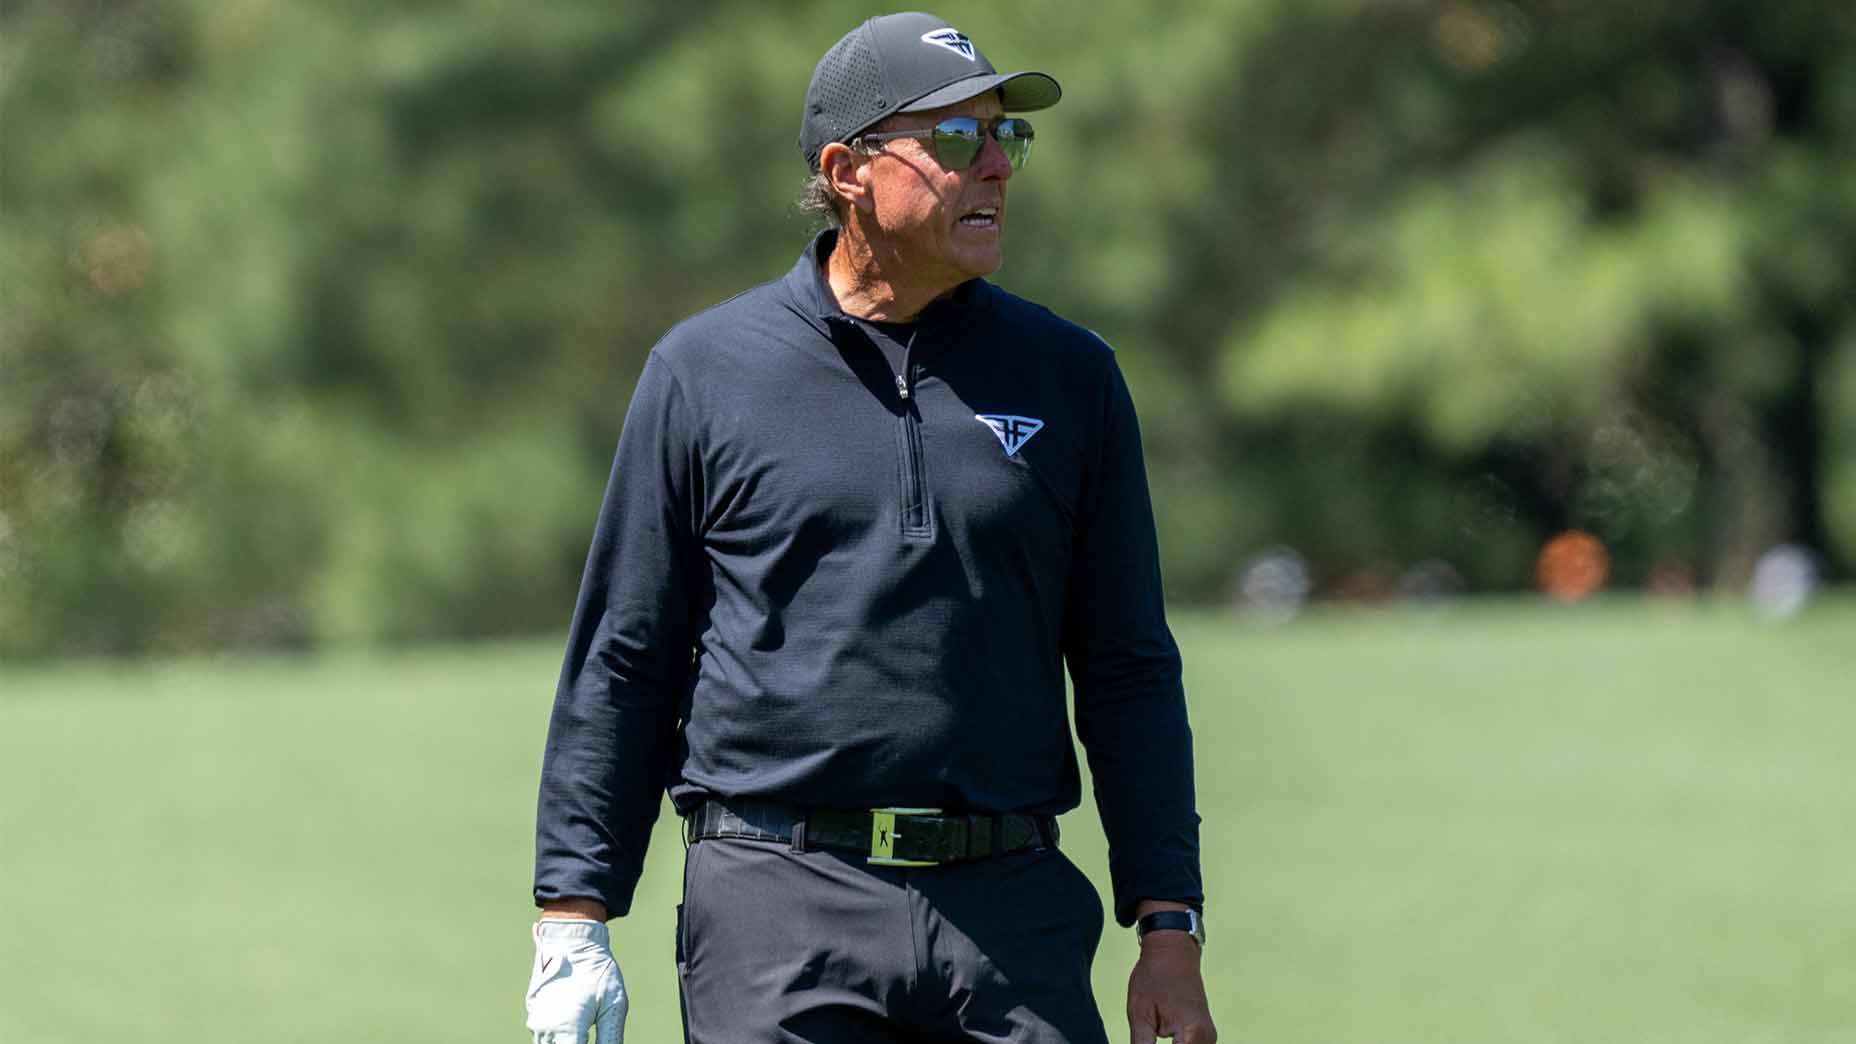 In a stunning Masters performance, Phil Mickelson glimpses into the past